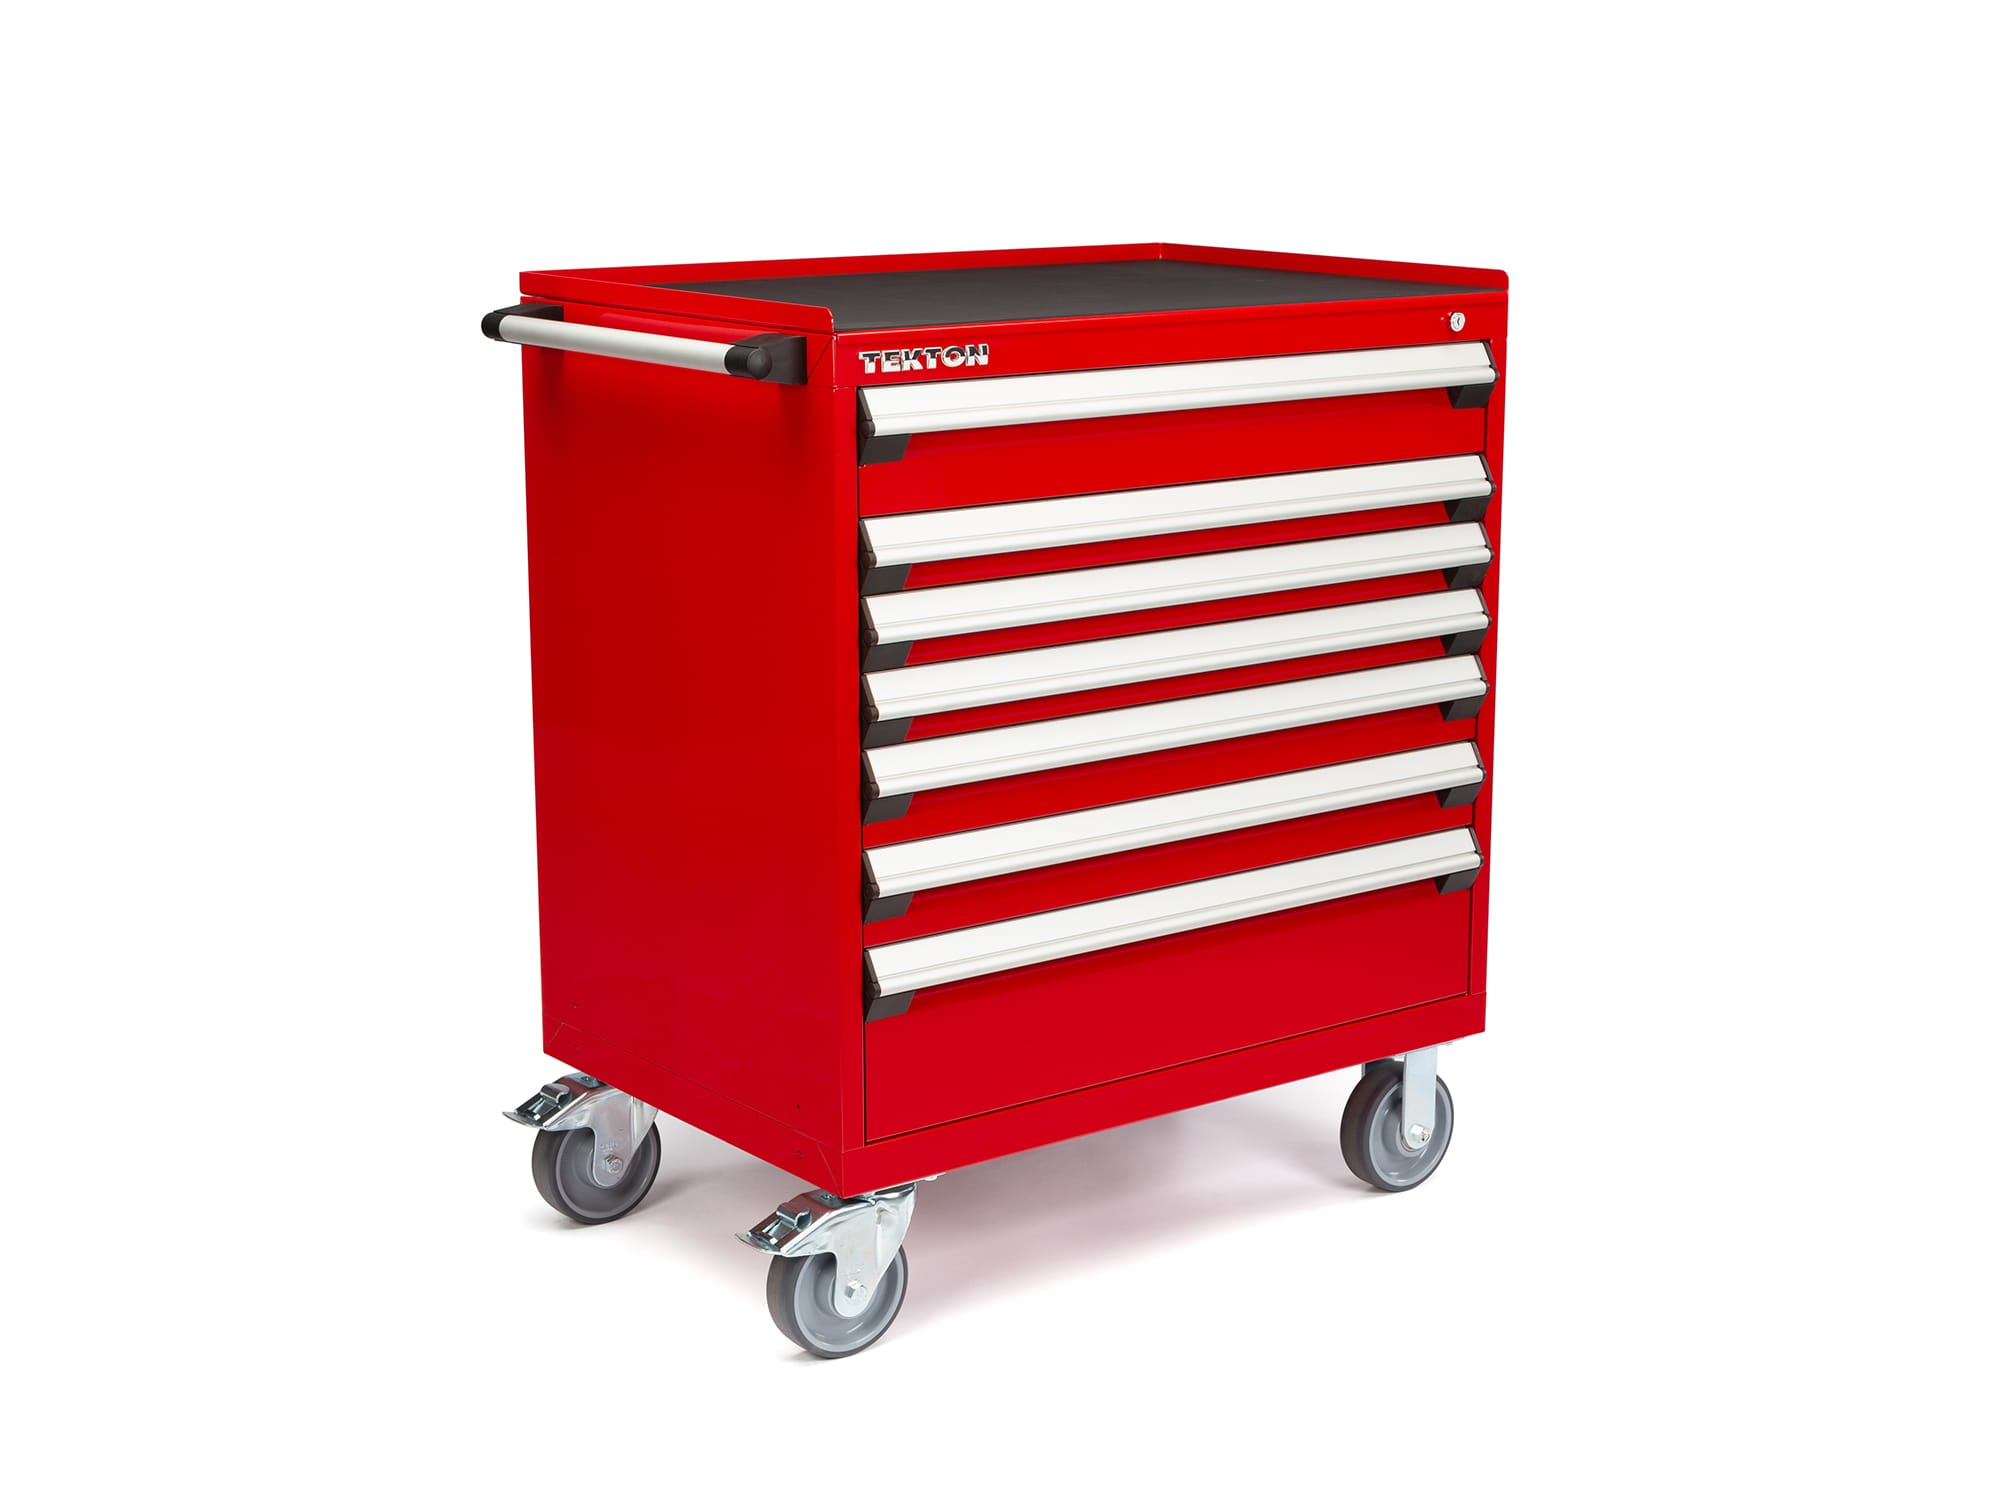 36 x 24 Inch Tool Cabinet (Red)